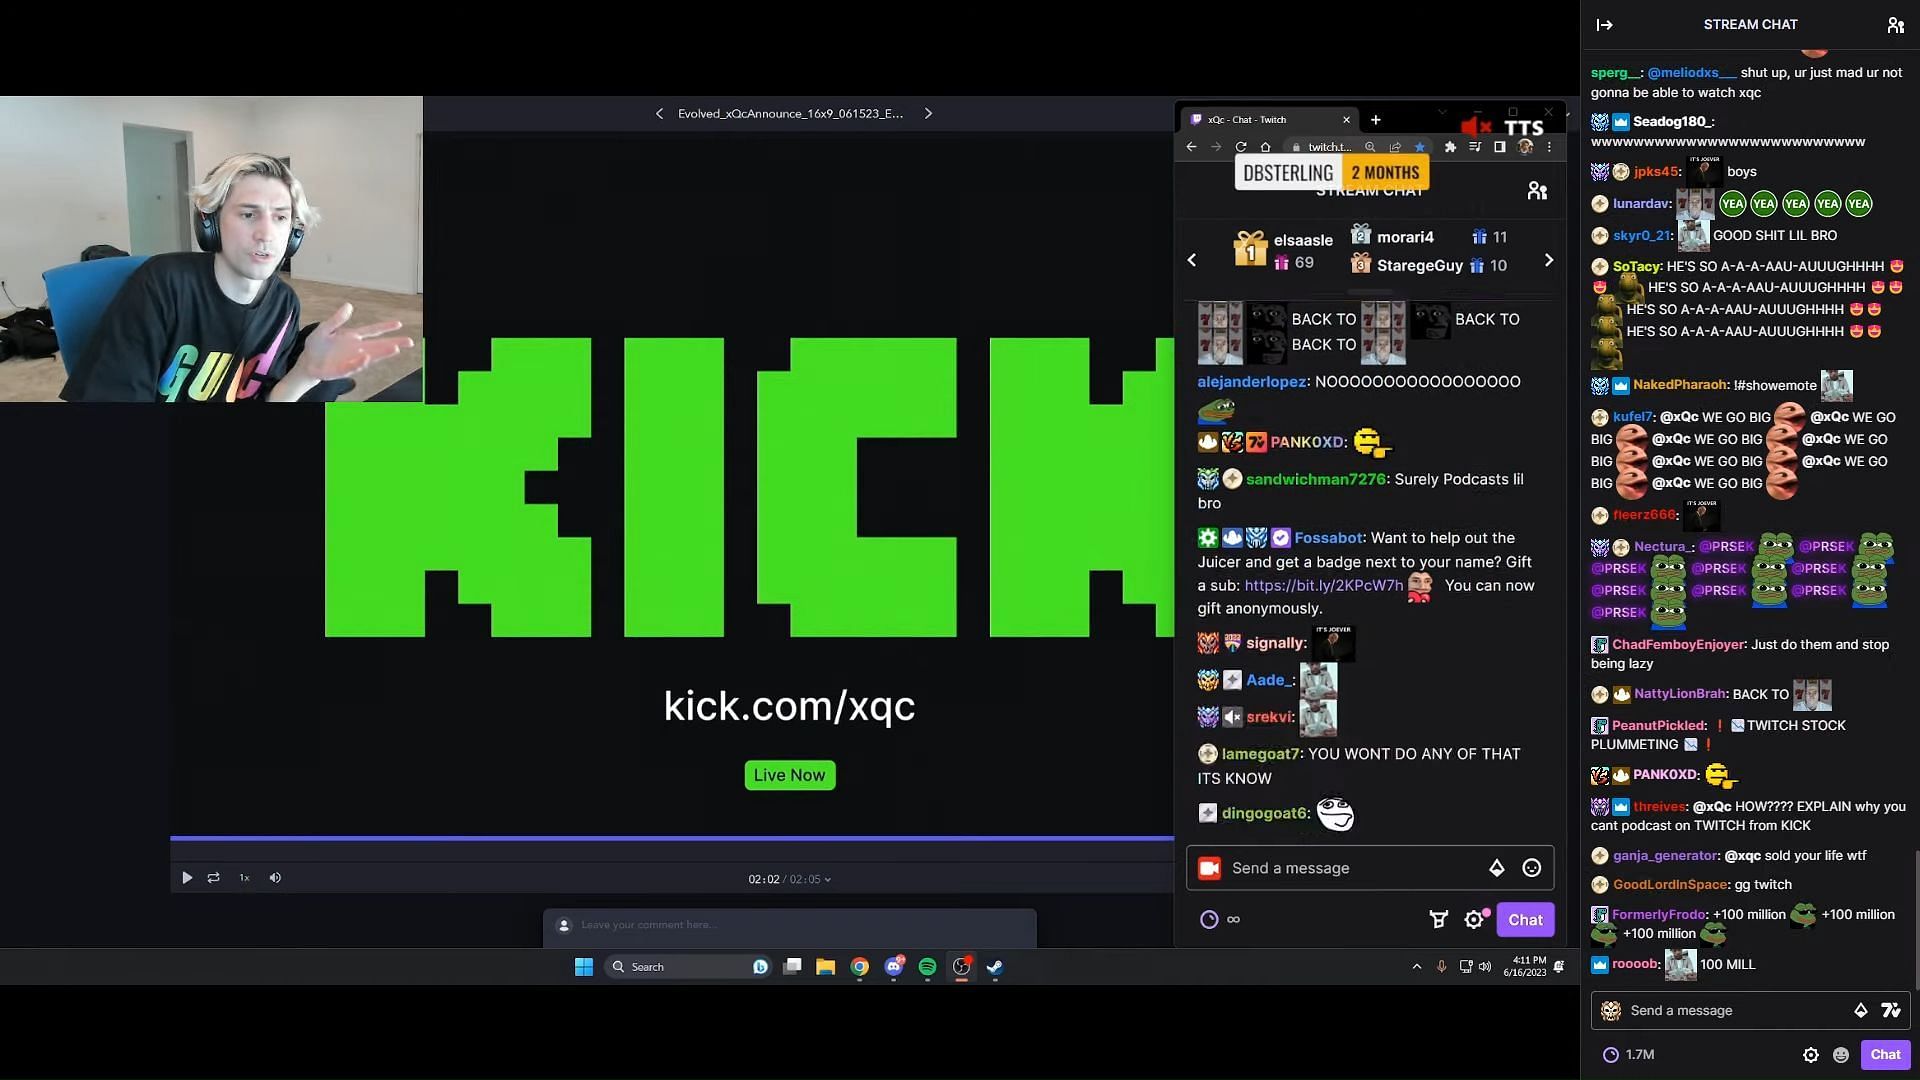 xQc explains Twitch CEO is happy for him as he signs a two year deal with Kick worth $100 million (Image via xQc Clips/YouTube)